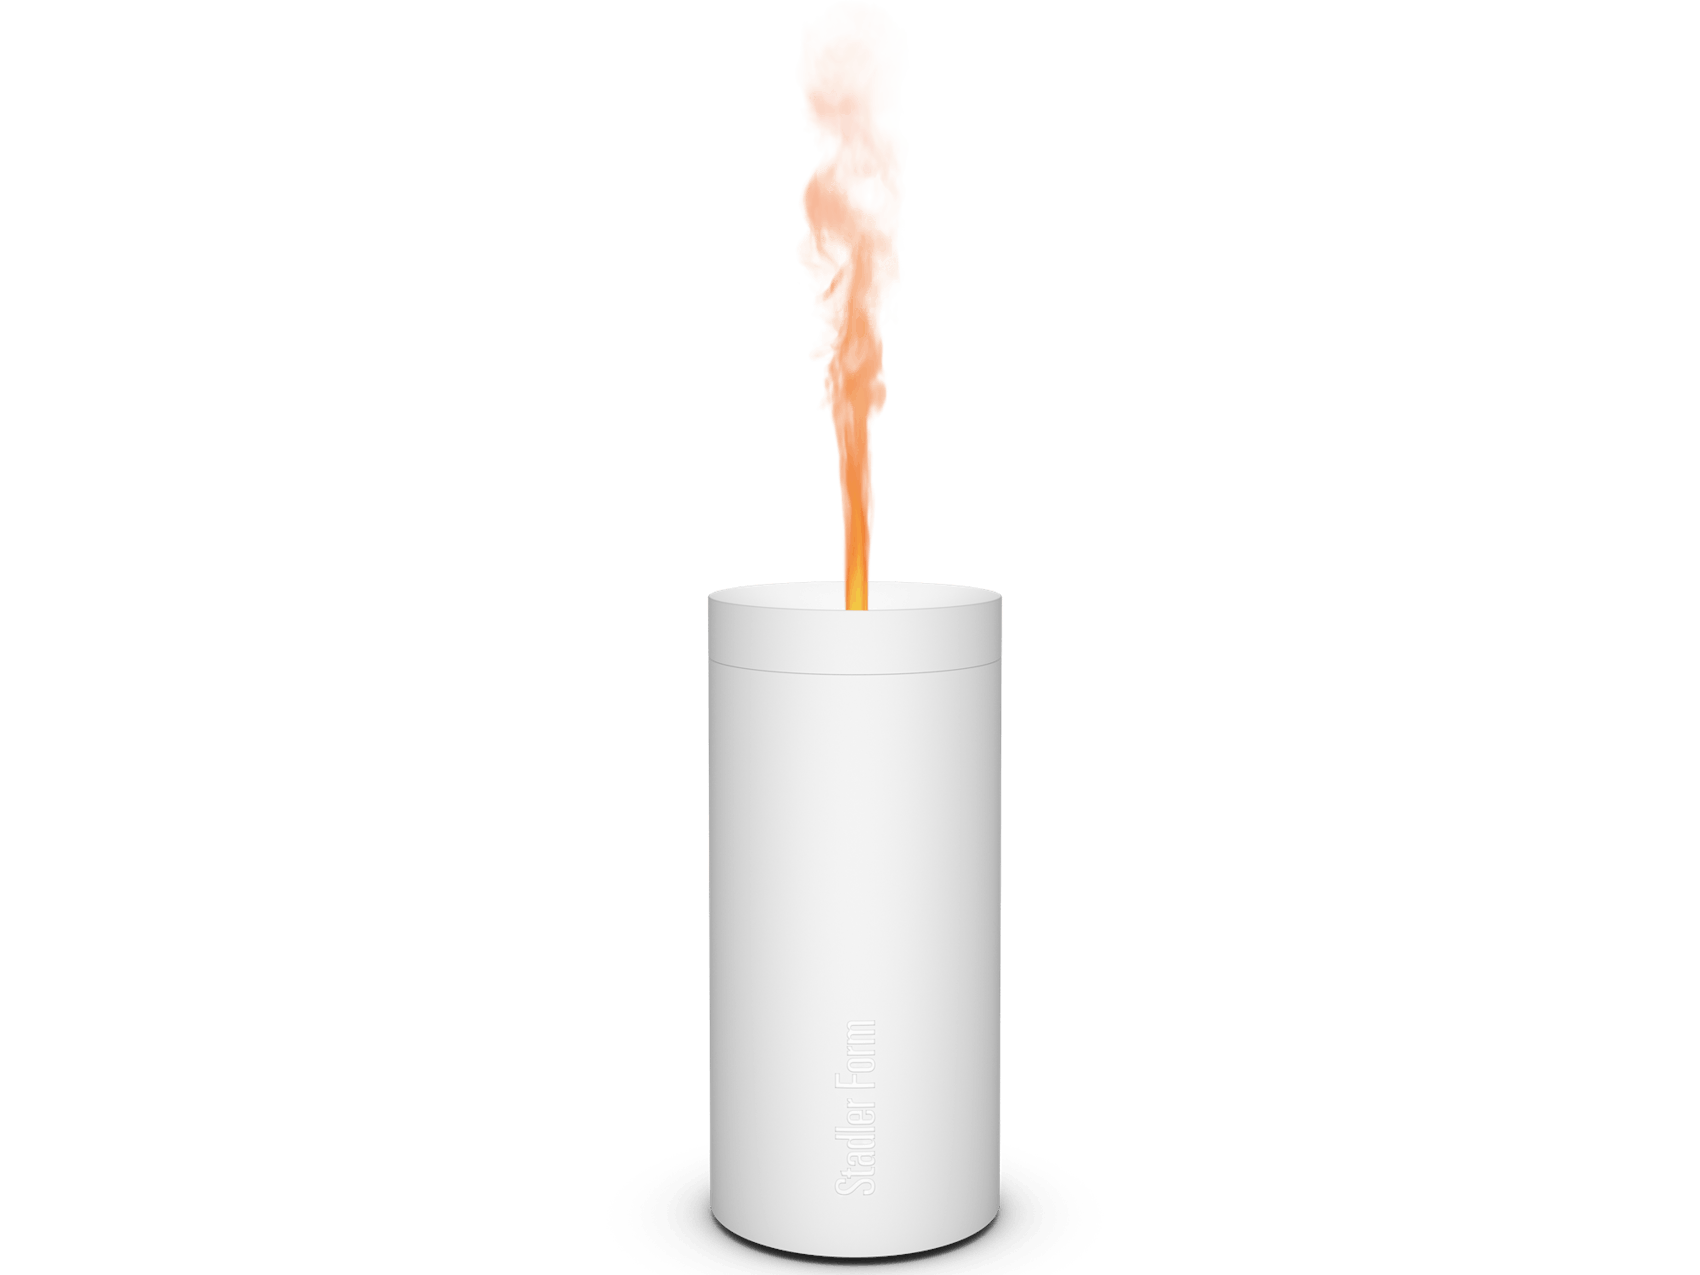 Lucy aroma diffuser by Stadler Form in white as perspective view